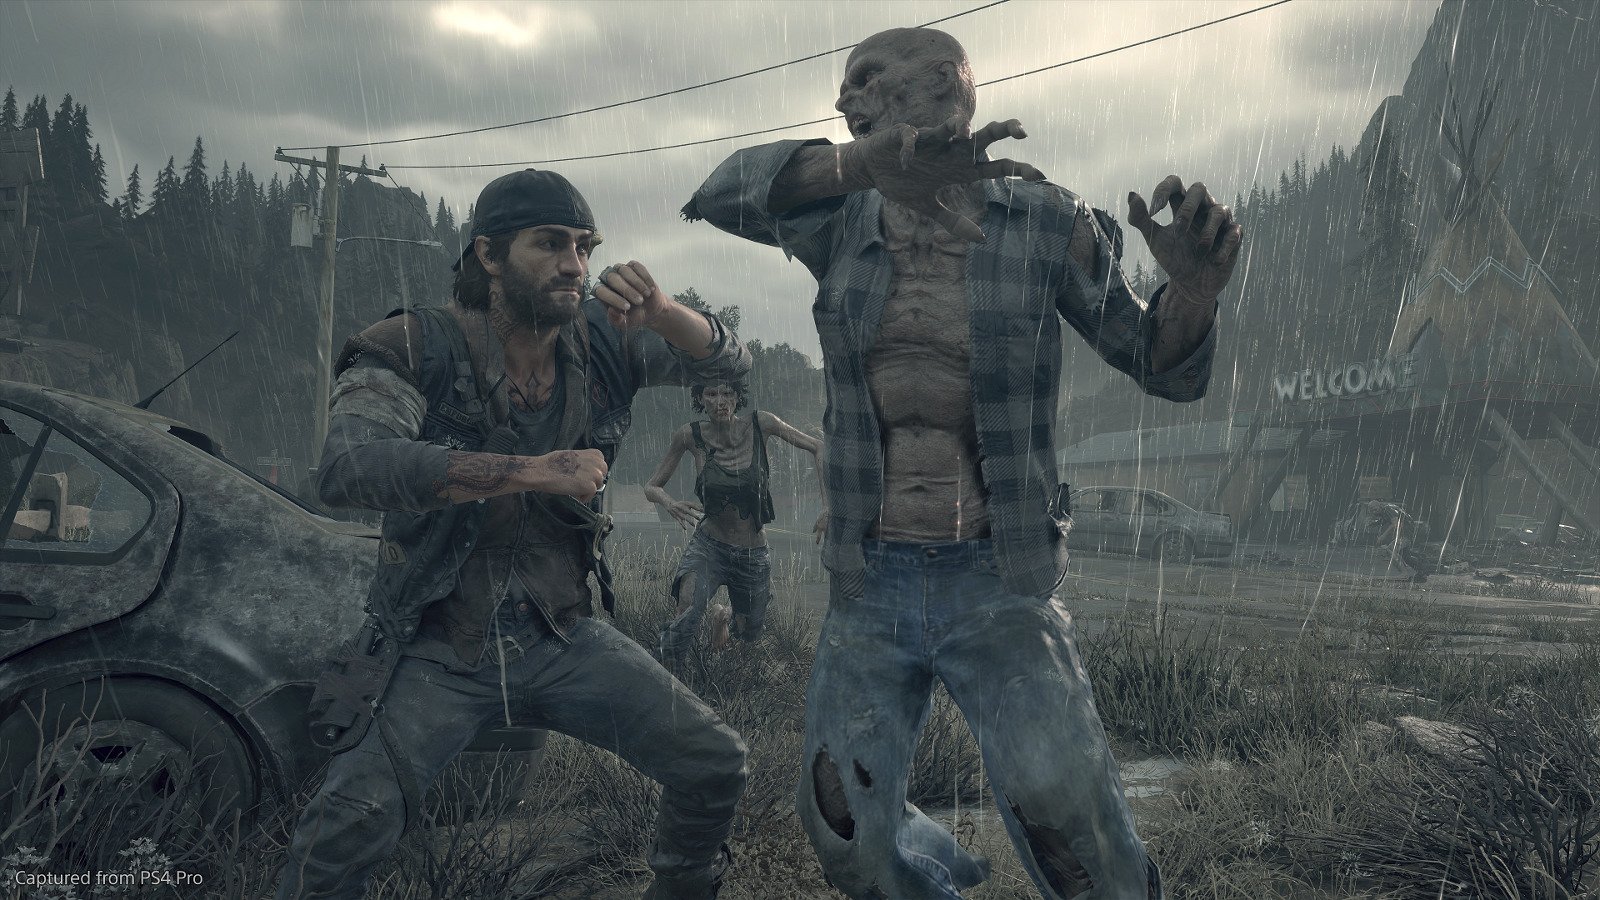 Director confirms Days Gone 2 was pitched, but won't verify Sony